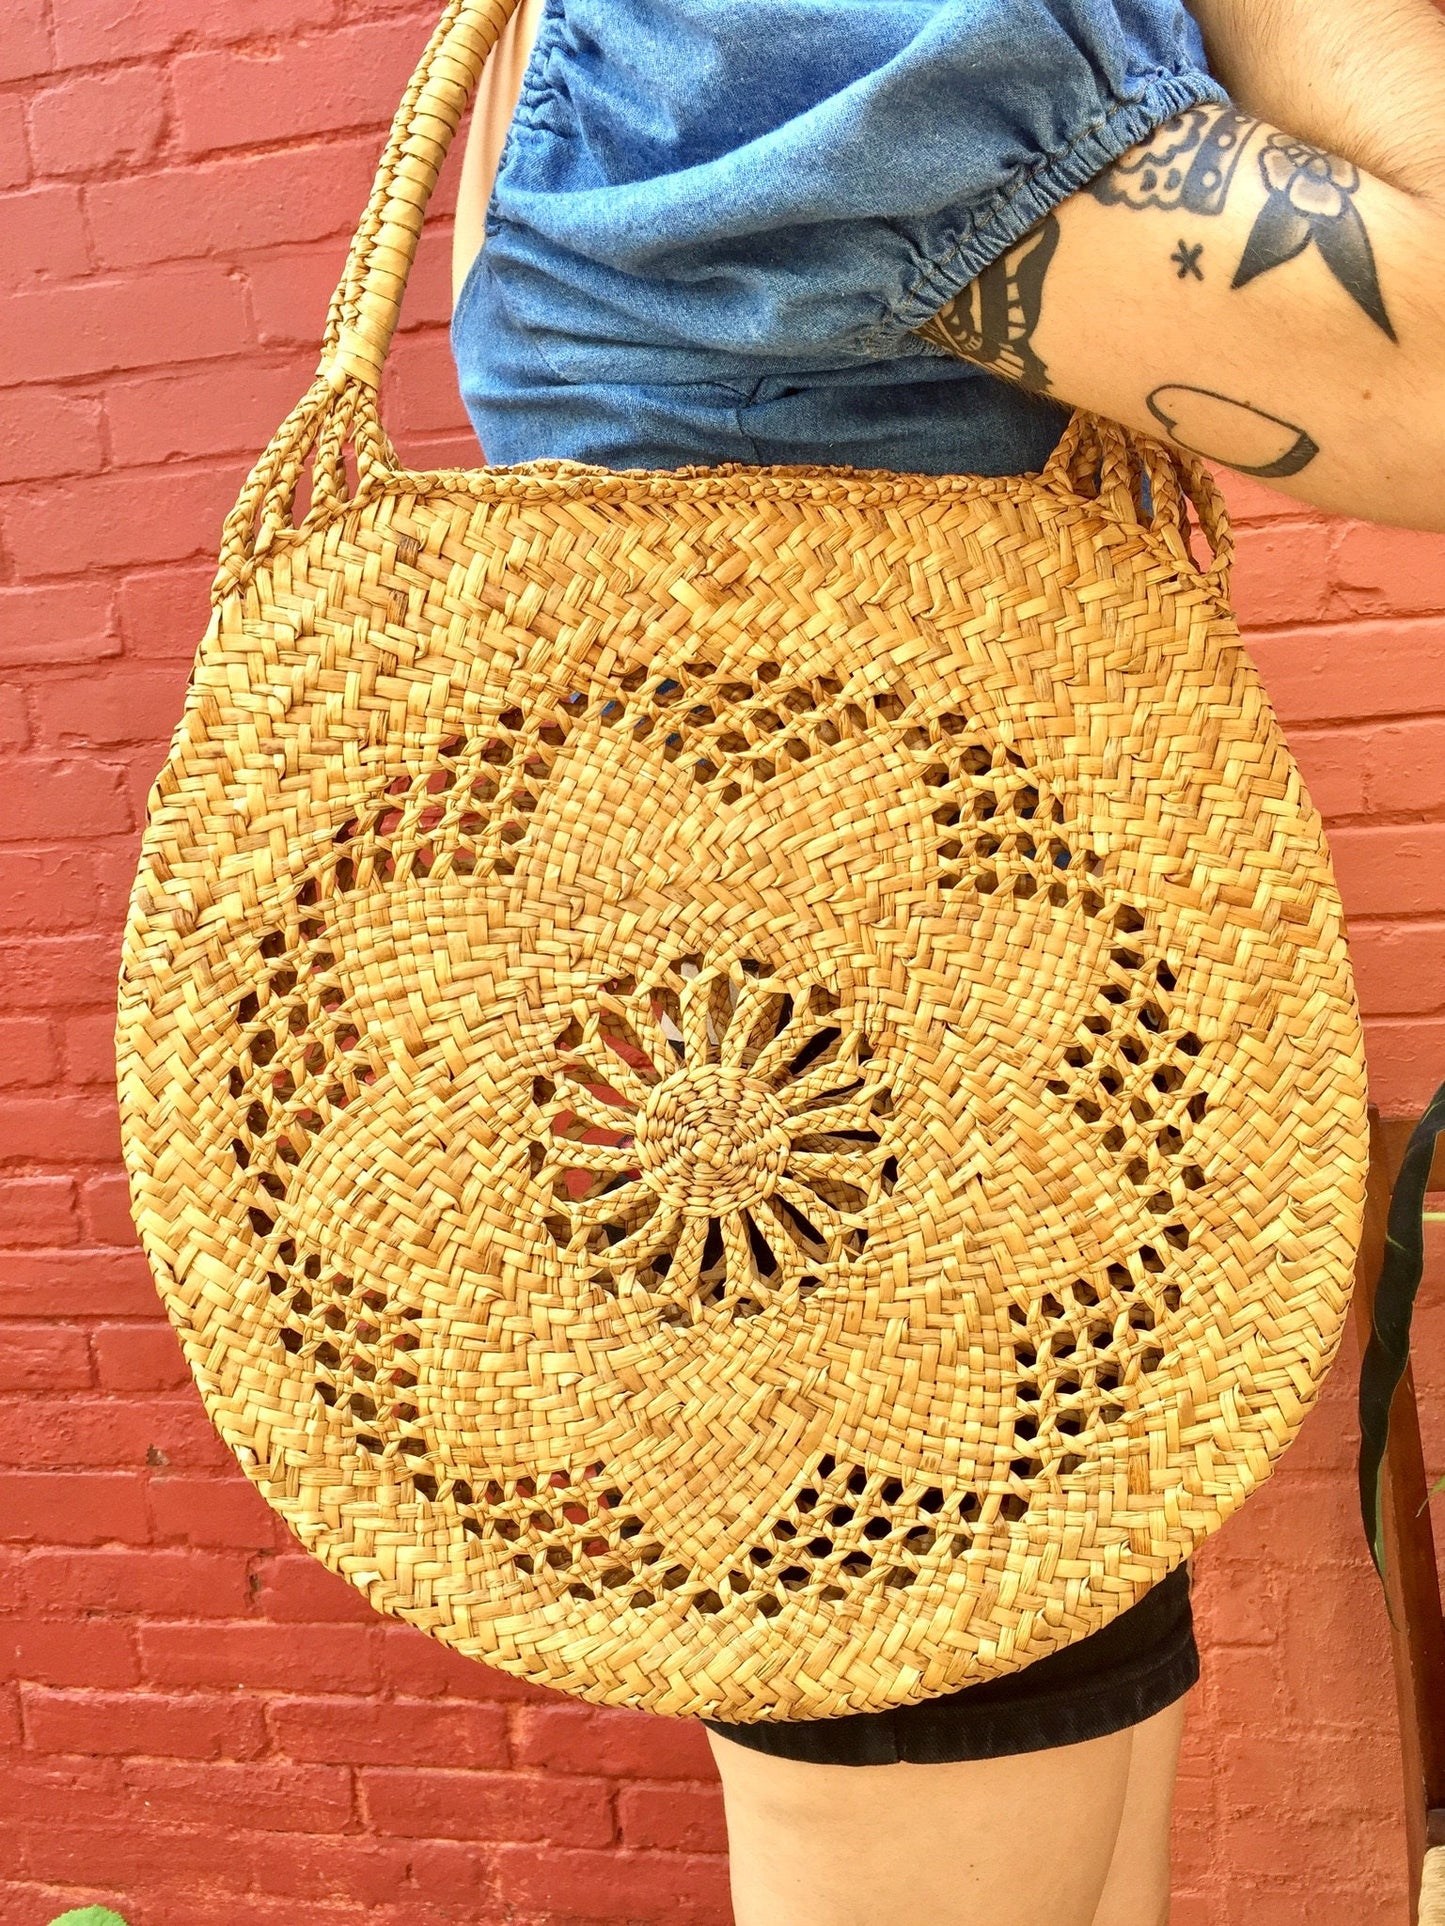 Round woven straw bag with intricate floral pattern design hanging on a person's tattooed arm against a red brick wall background.